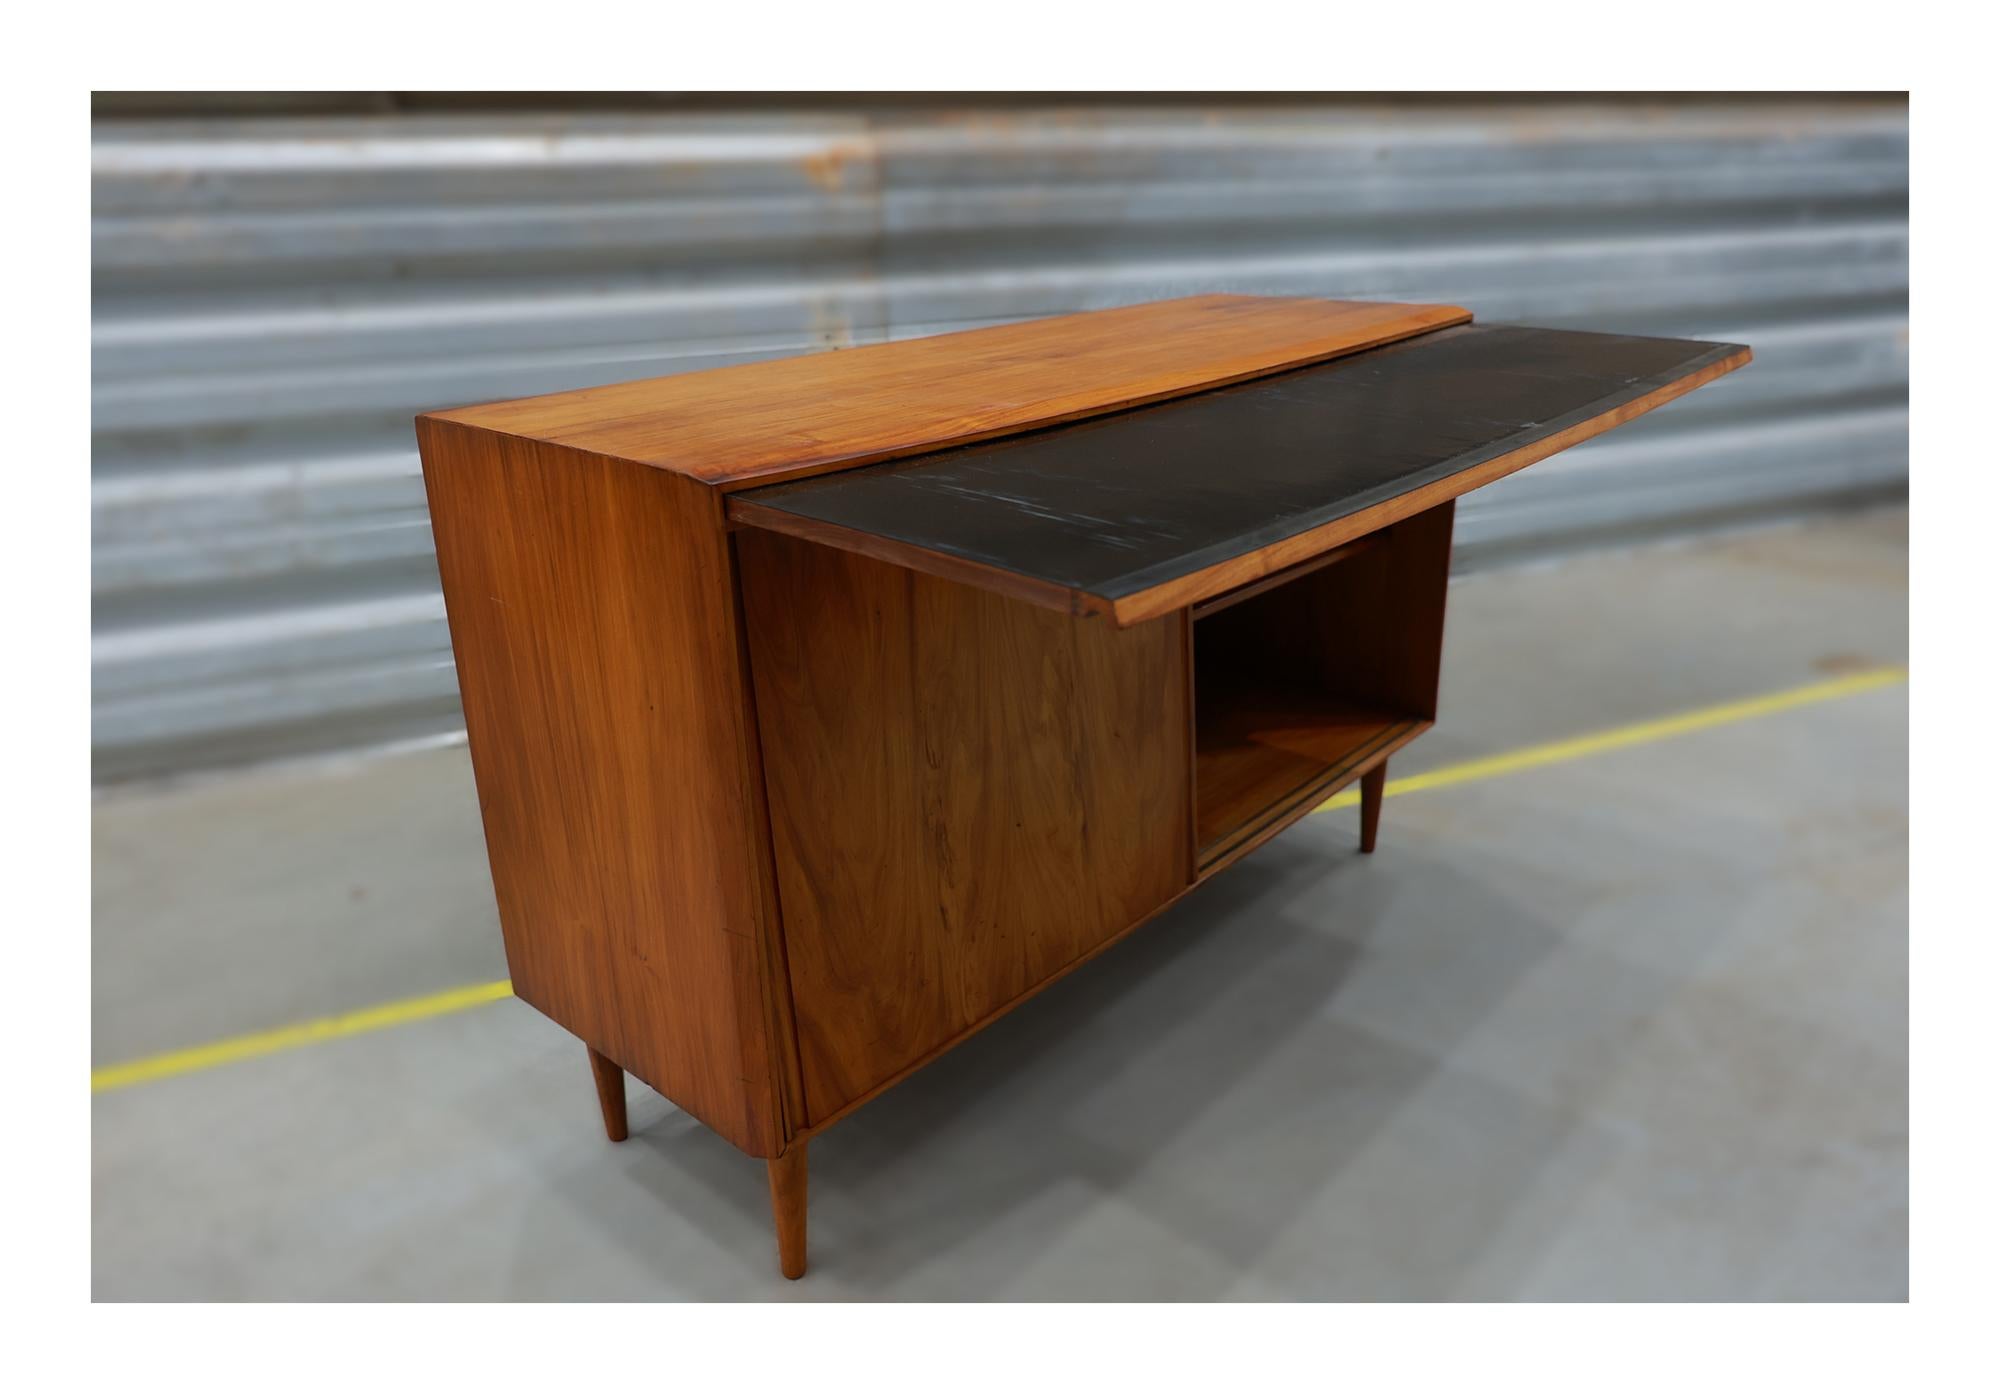 Available now, this Brazilian Modern Sideboard in Caviuna Wood by Carlo Hauner & Martin Eisler, is beautiful!

This formidable sideboard was designed by Carlo Hauner and Martin Eisler for Moveis Artesanais, the design duo’s first company and